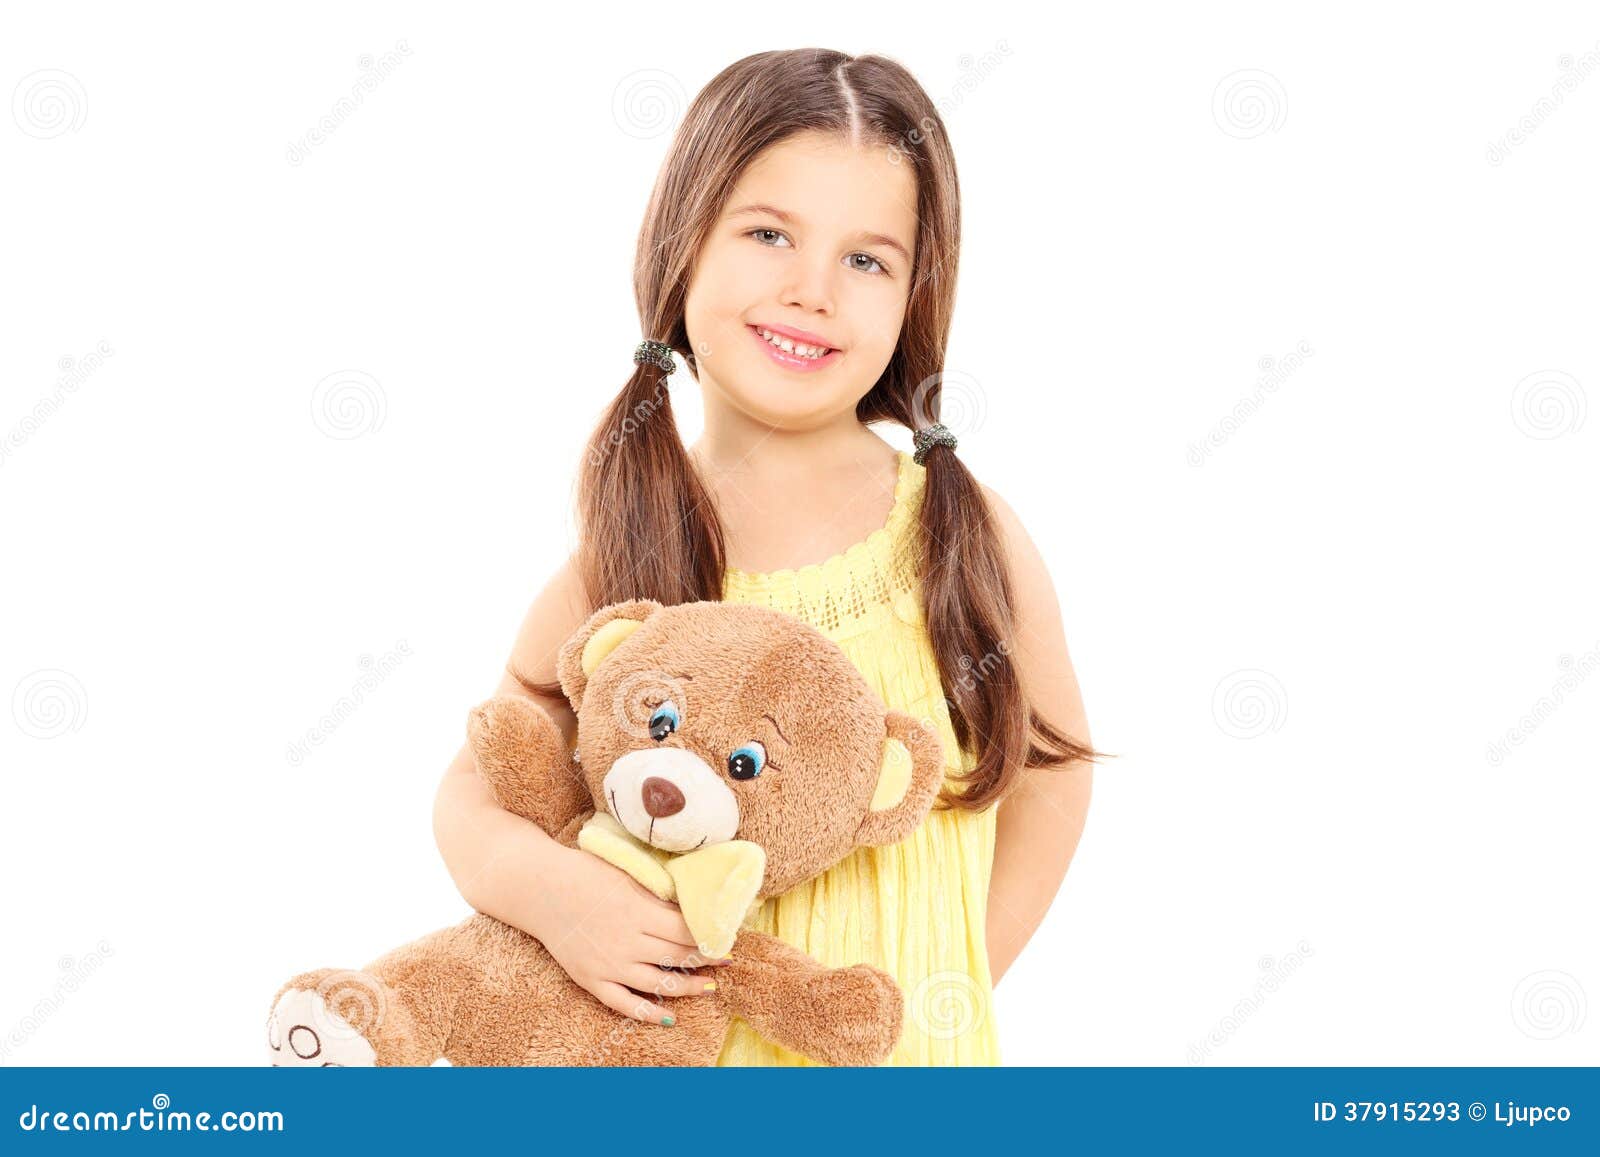 Cute Little Girl in Yellow Dress Holding a Teddy Bear Stock Image ...